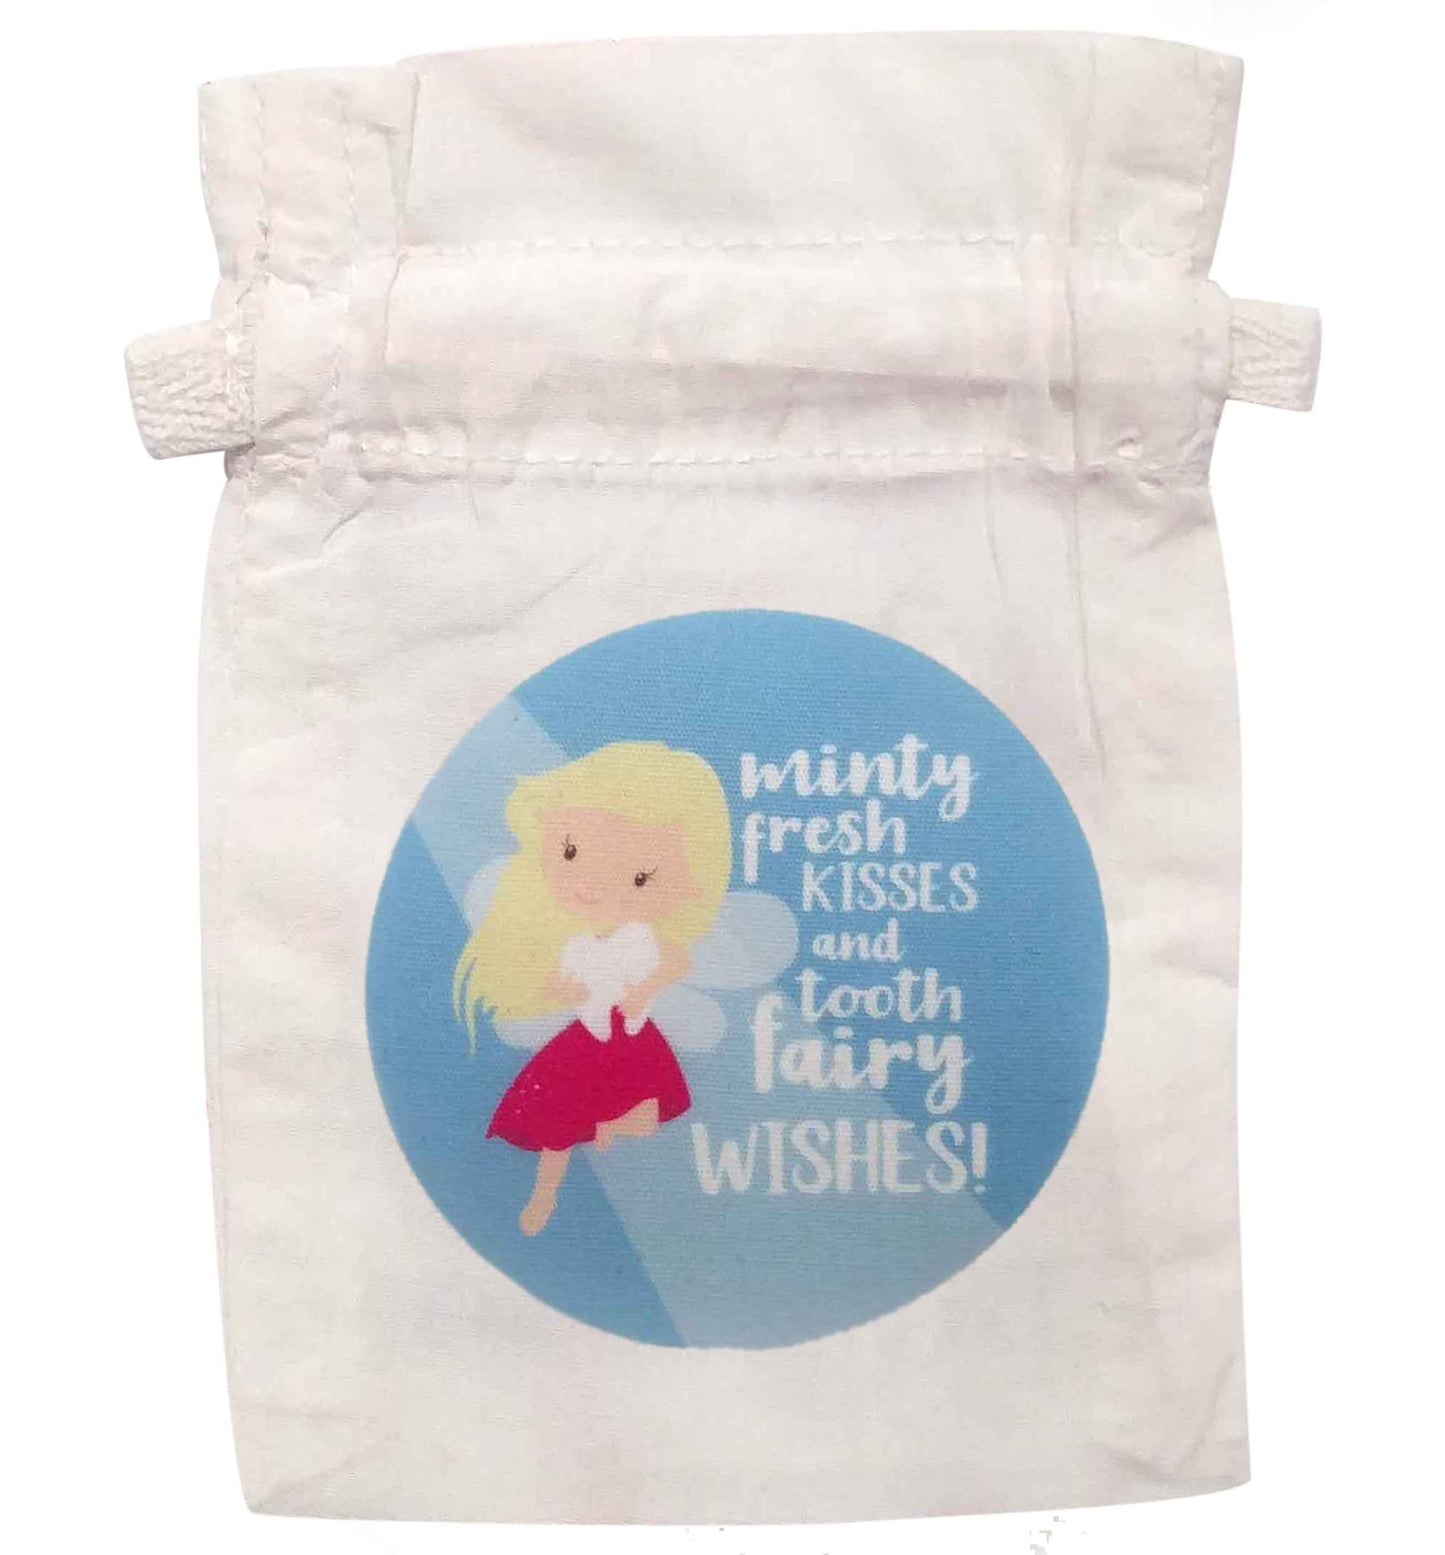 Minty fresh kisses and tooth fairy wishes | Organic Cotton drawstring bag | Flox Creative